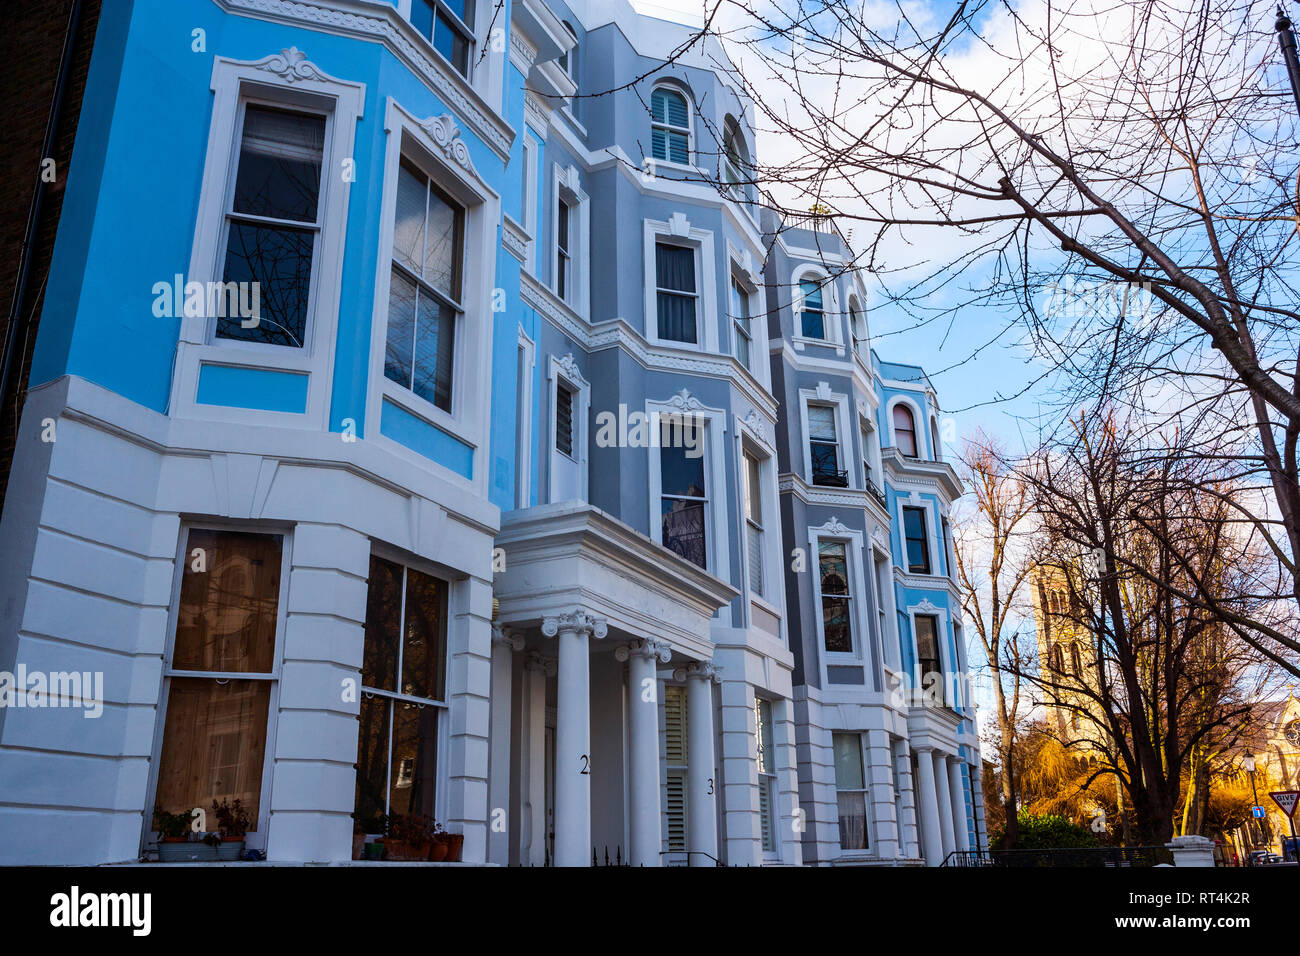 Brightly coloured house facades and All Saints Church, Notting Hill, London Stock Photo